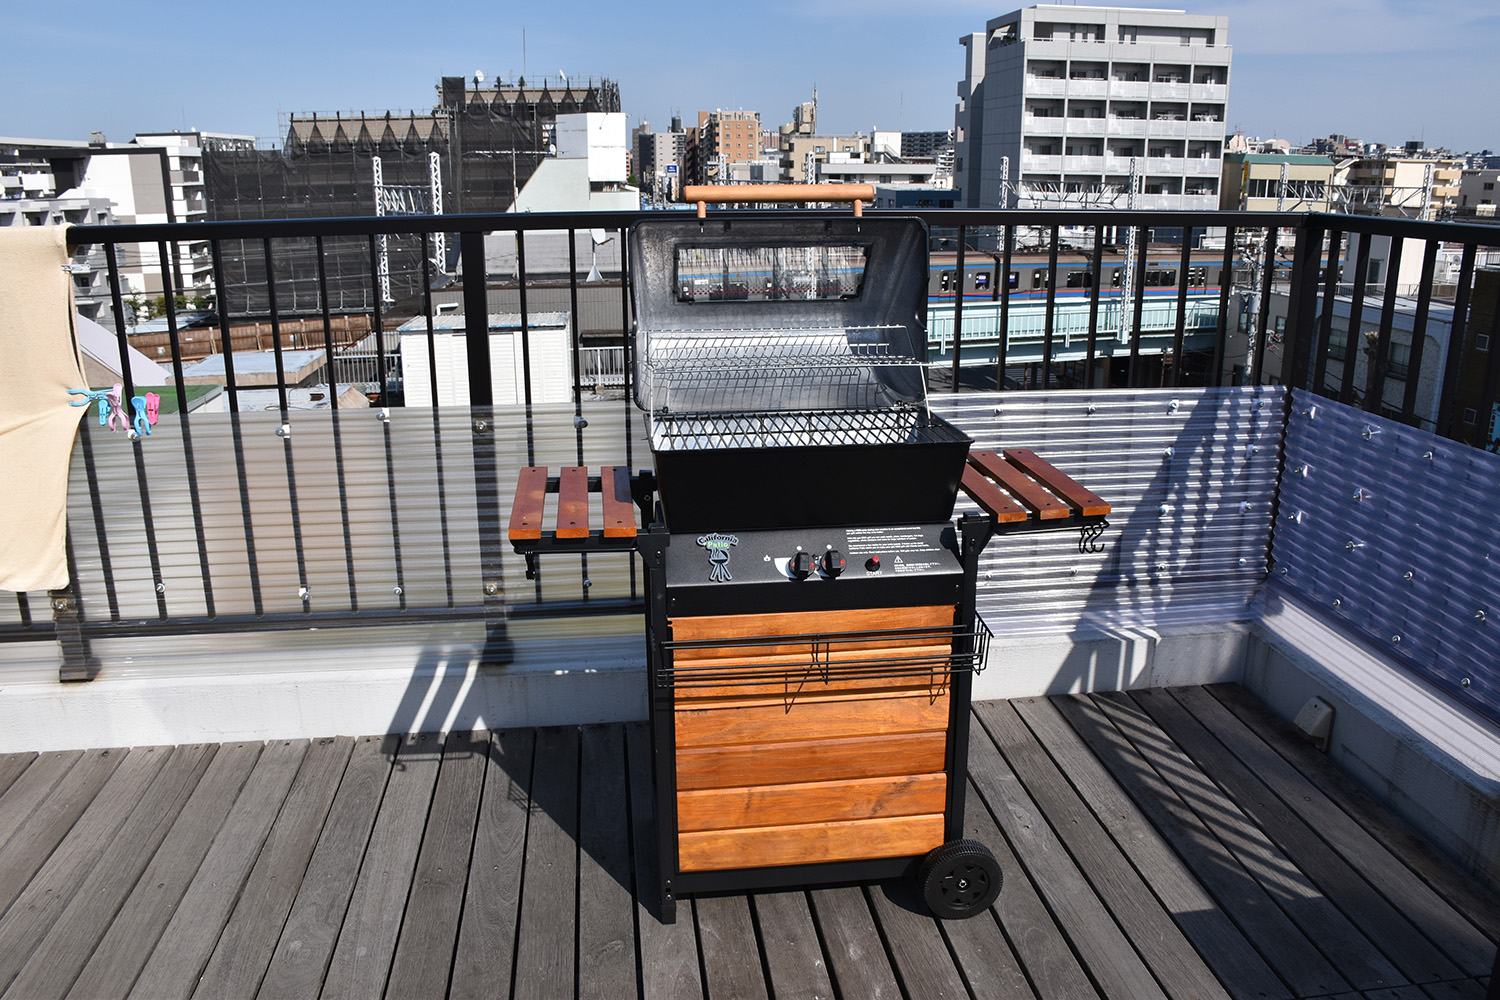 BBQ on the roof during the warmer months